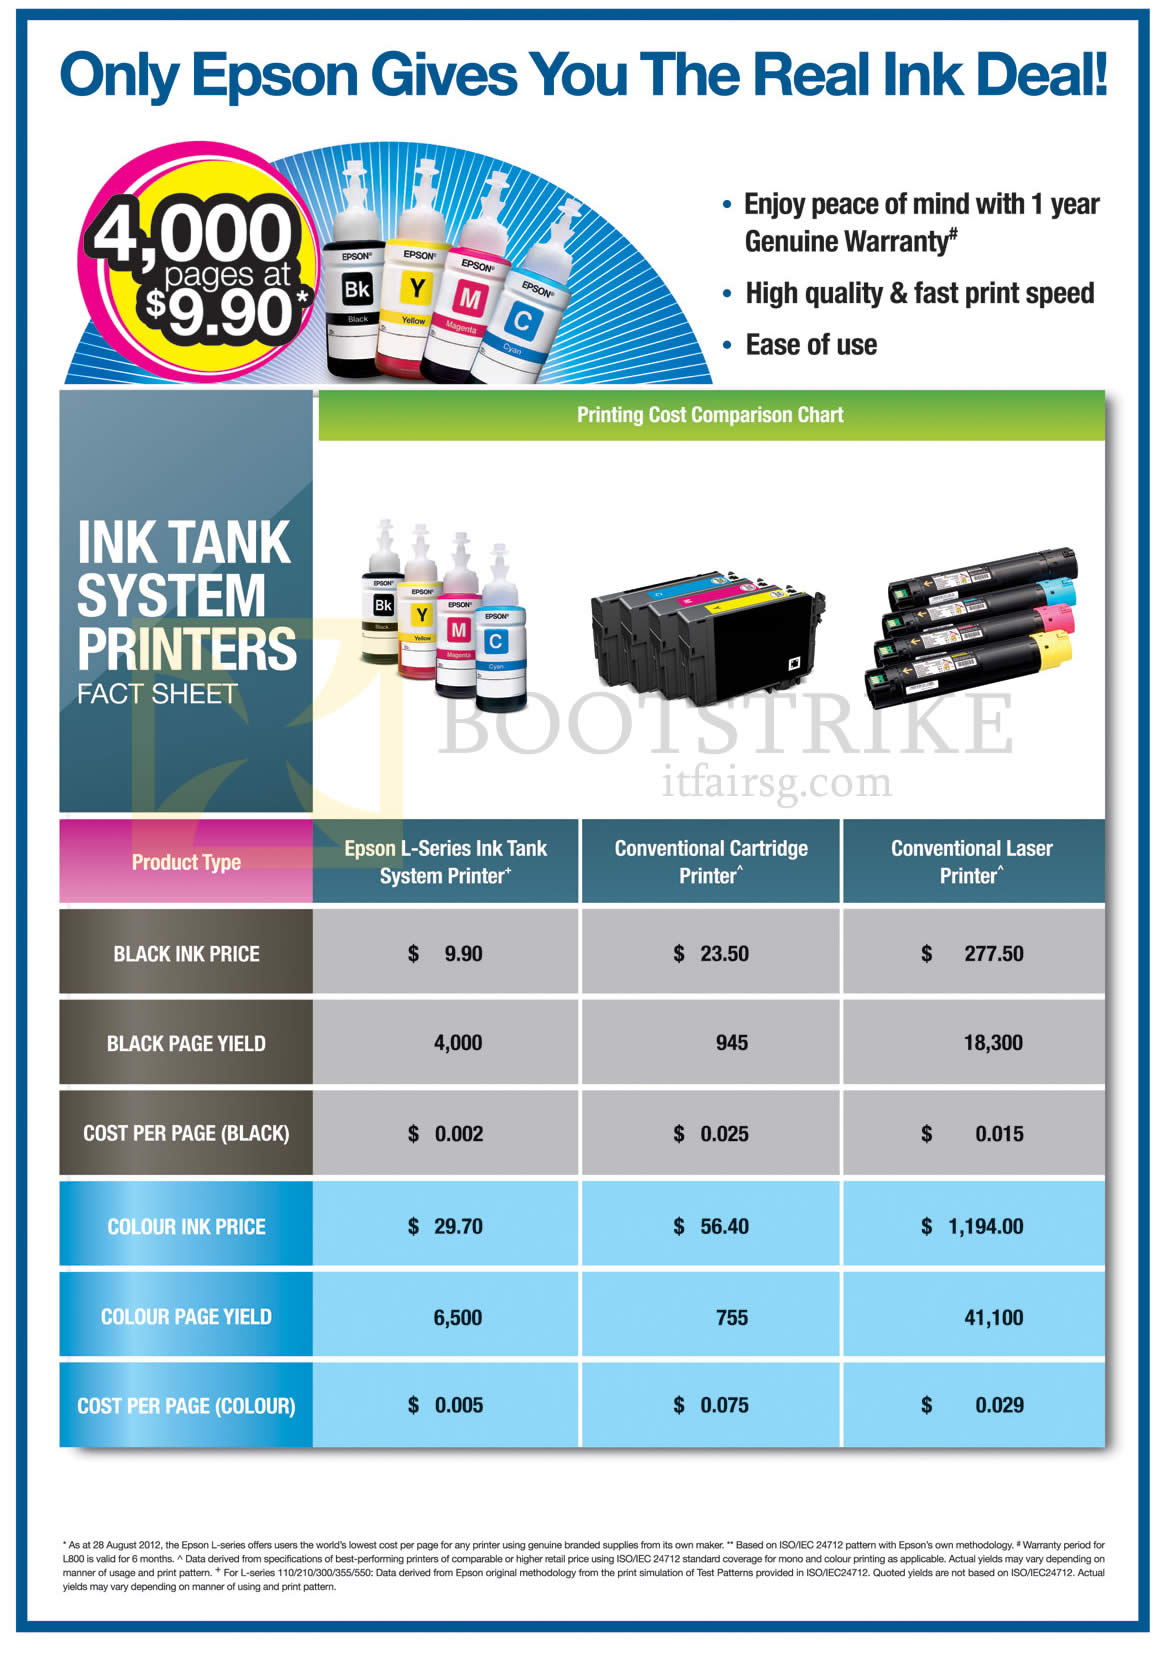 SITEX 2013 price list image brochure of Epson Printing Cost Comparison Charts